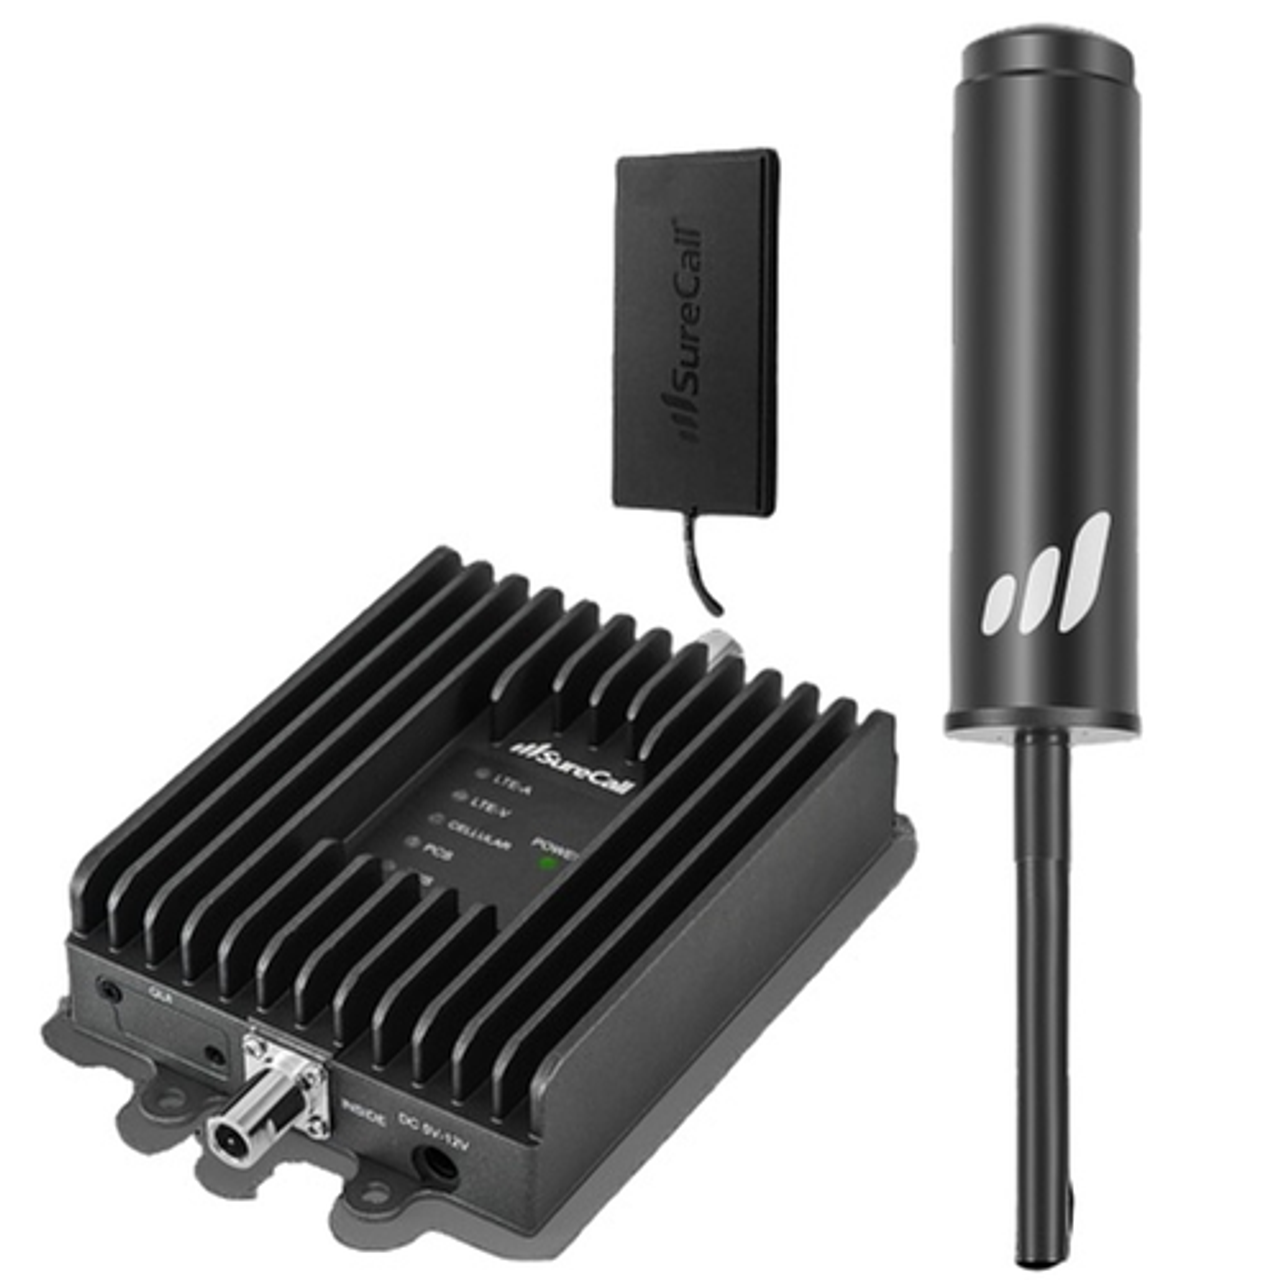 SureCall - Fusion2Go OTR - Cell Phone Signal Booster for Trucks, Work Vans, Fleets, RVs and Large Vehicles - Black